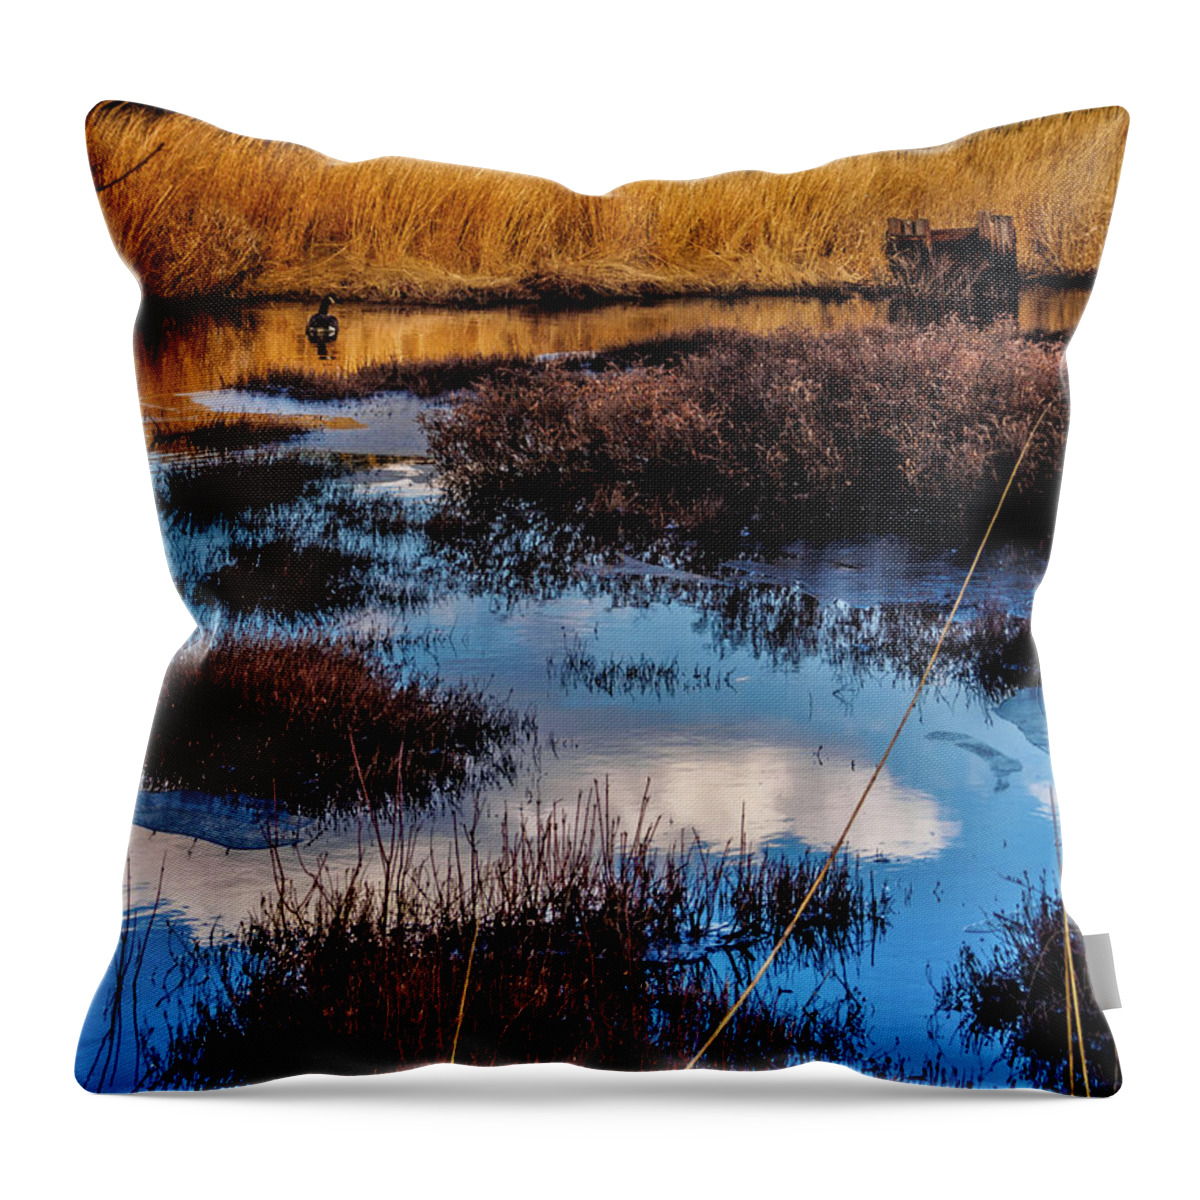 Landscape Throw Pillow featuring the photograph Pineland Cloud Reflections by Louis Dallara